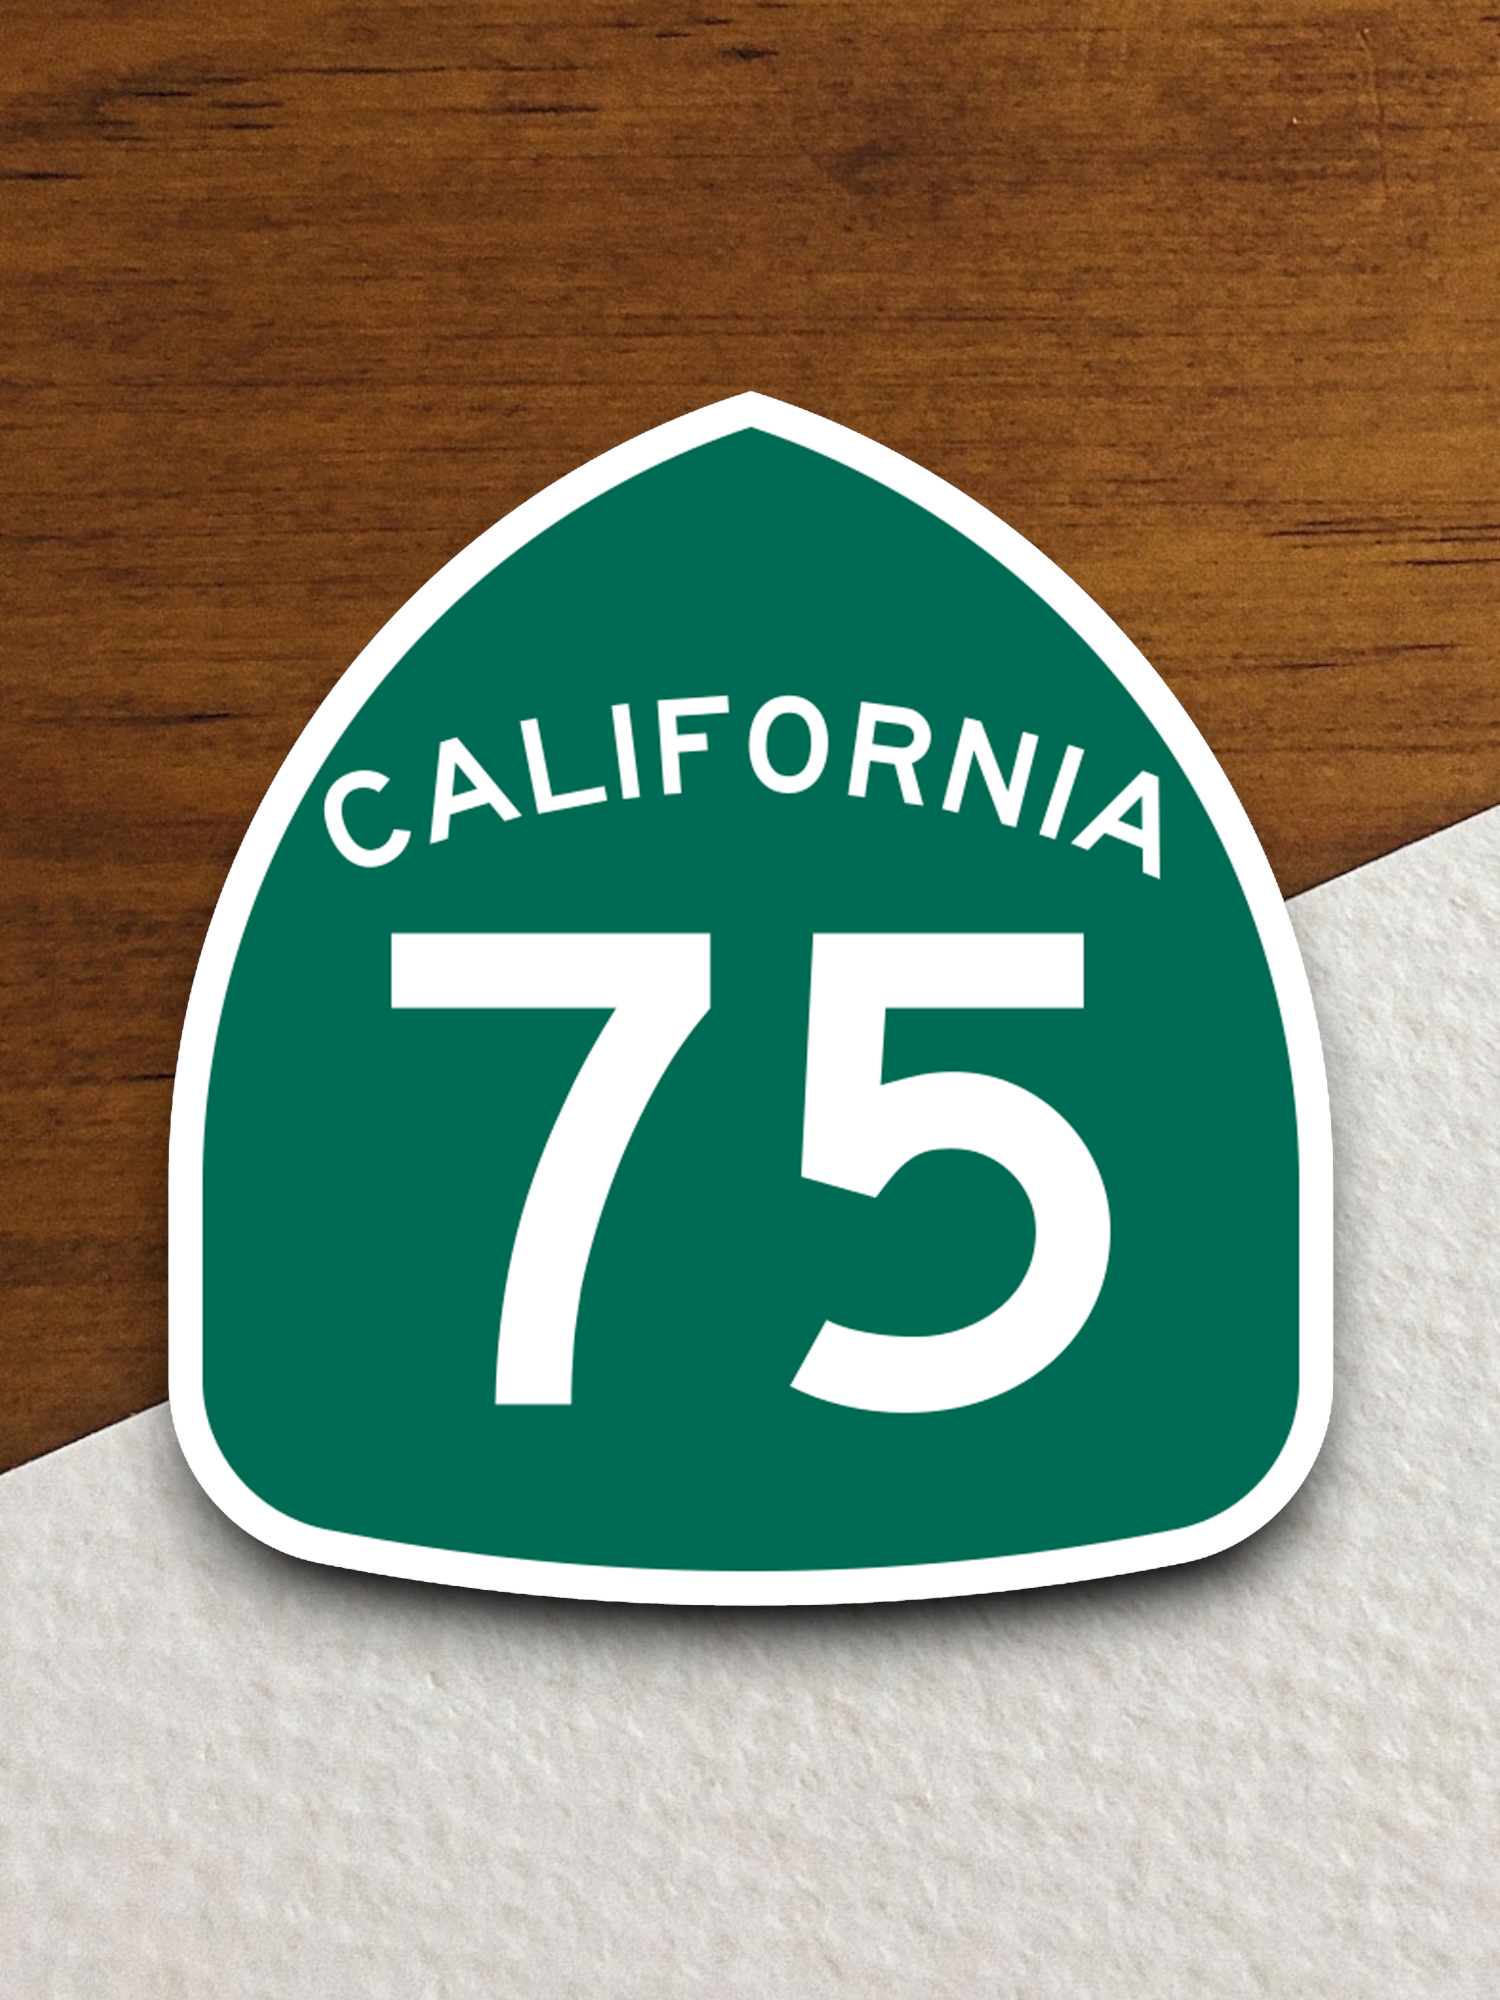 California State Route 75 Road Sign Sticker